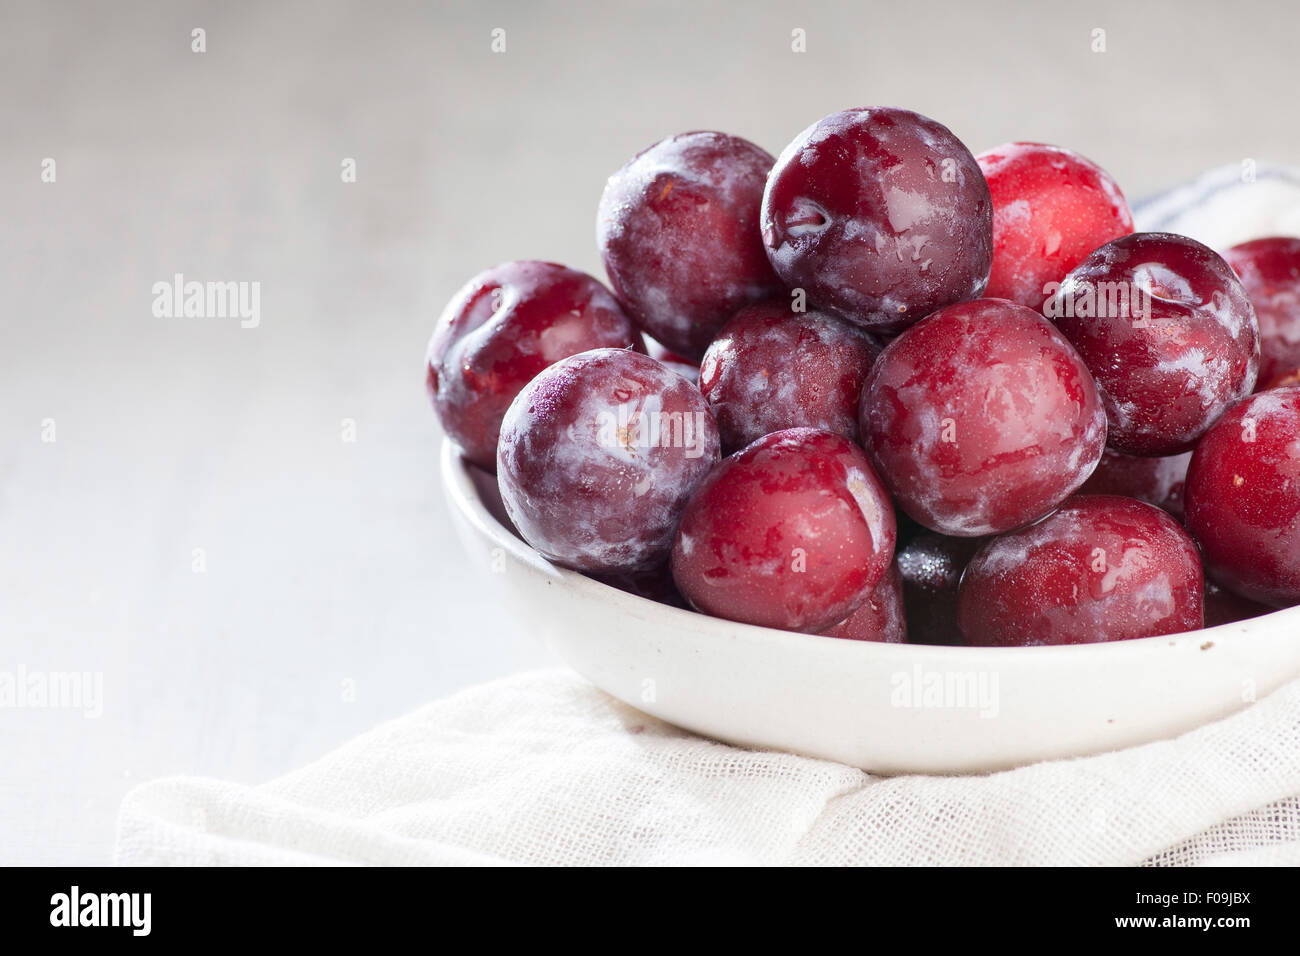 Washed Ripe Plums on white rustic background Stock Photo